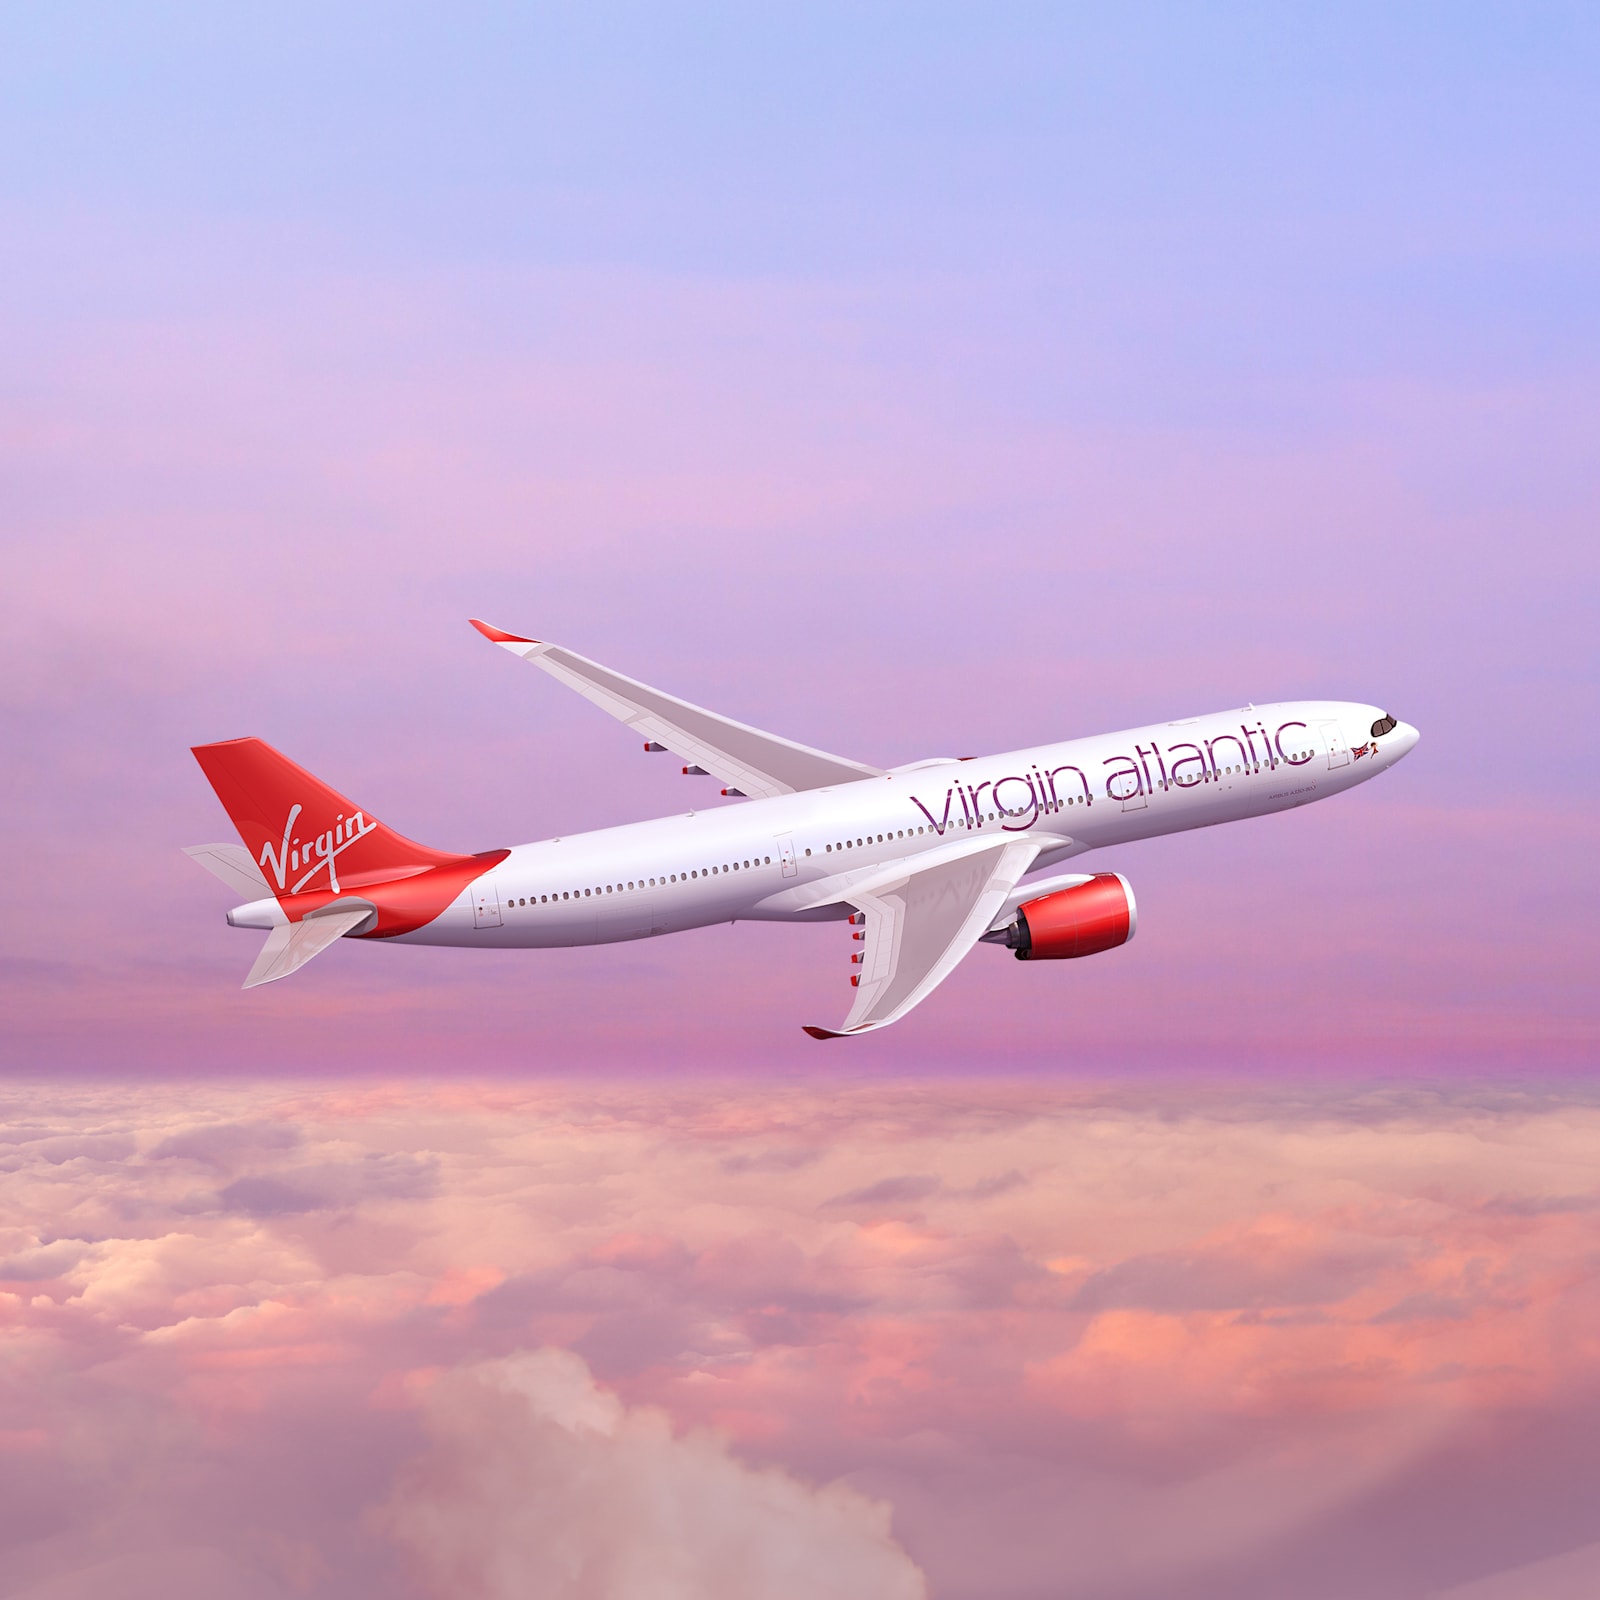 Virgin Atlantic appoints APG Israel to support growth in region